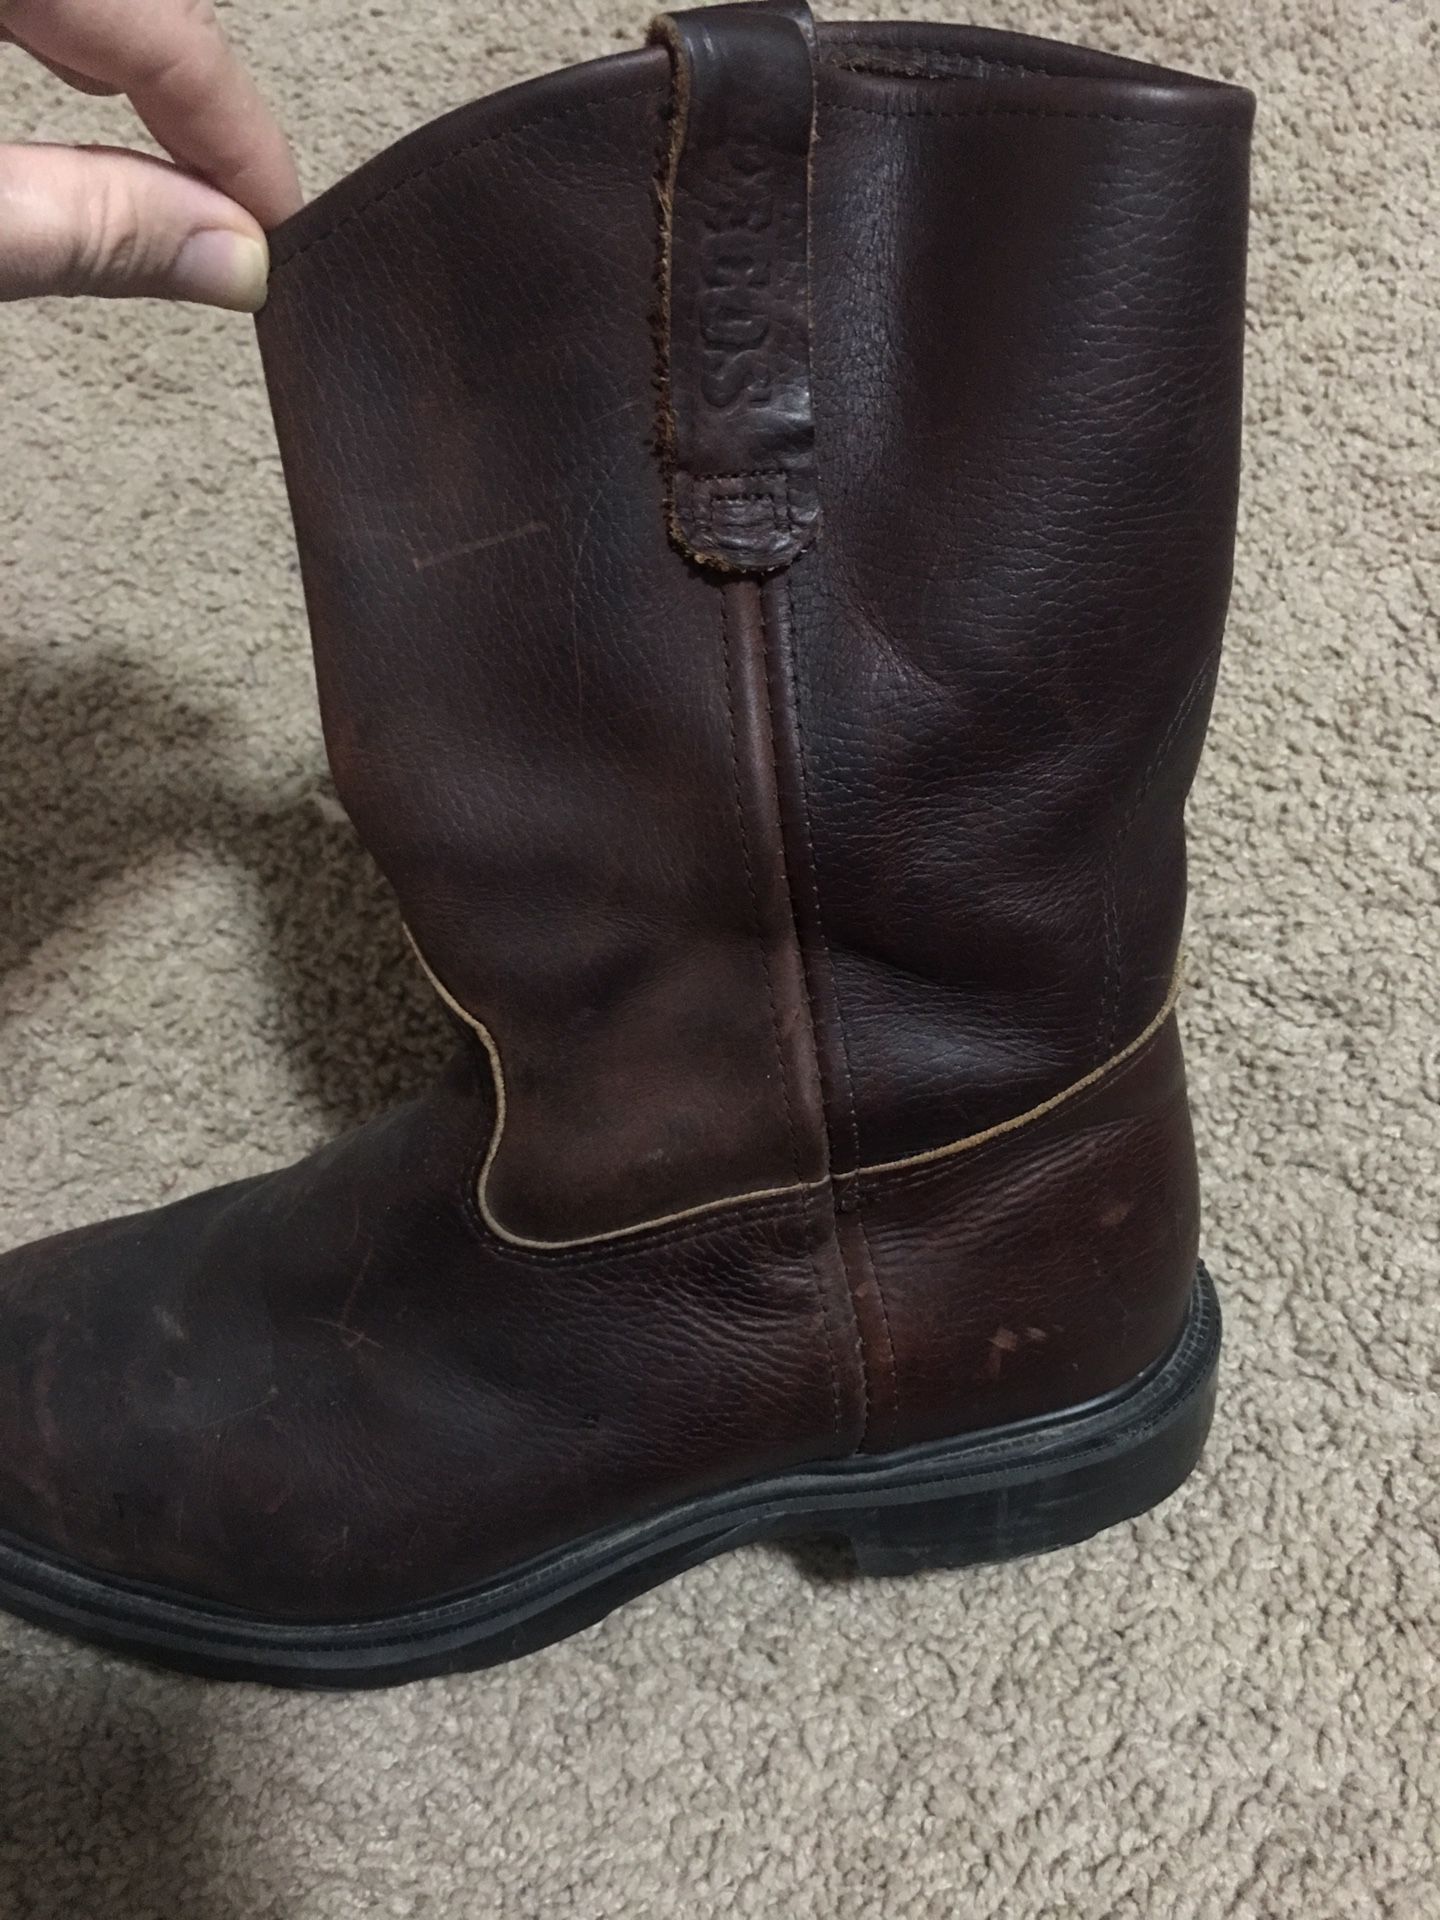 Red wing boots pecos sz 11